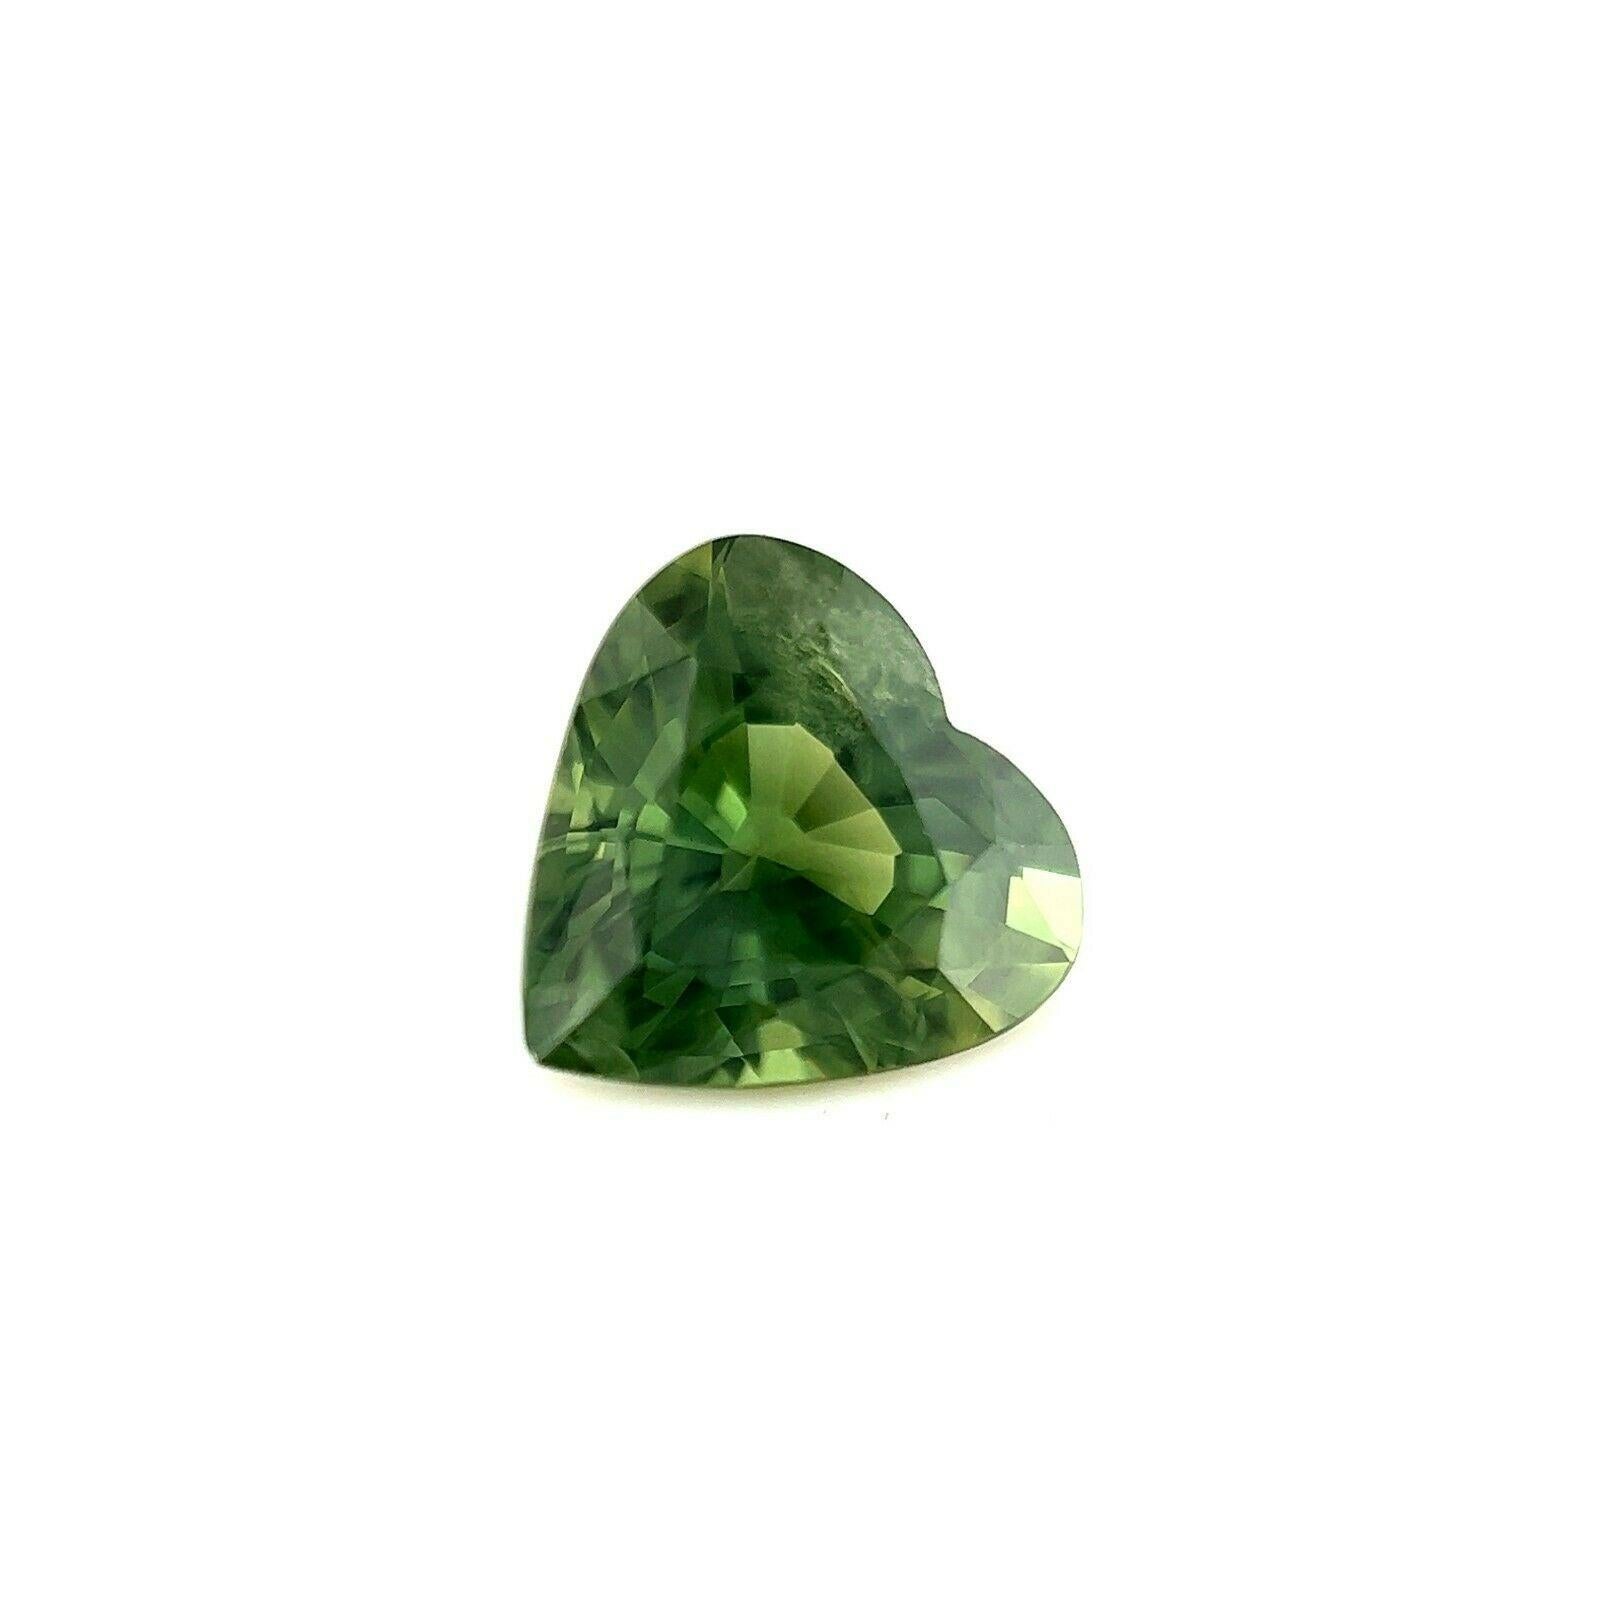 Fine Deep Green Colour Sapphire 1.26ct Heart Cut Rare Loose Gemstone 6.7x6.6mm

Natural Green Sapphire Heart Cut Gem.
1.26 Carat with a beautiful and unique green colour. Very rare and stunning to see. Has excellent clarity, a very clean stone. Also